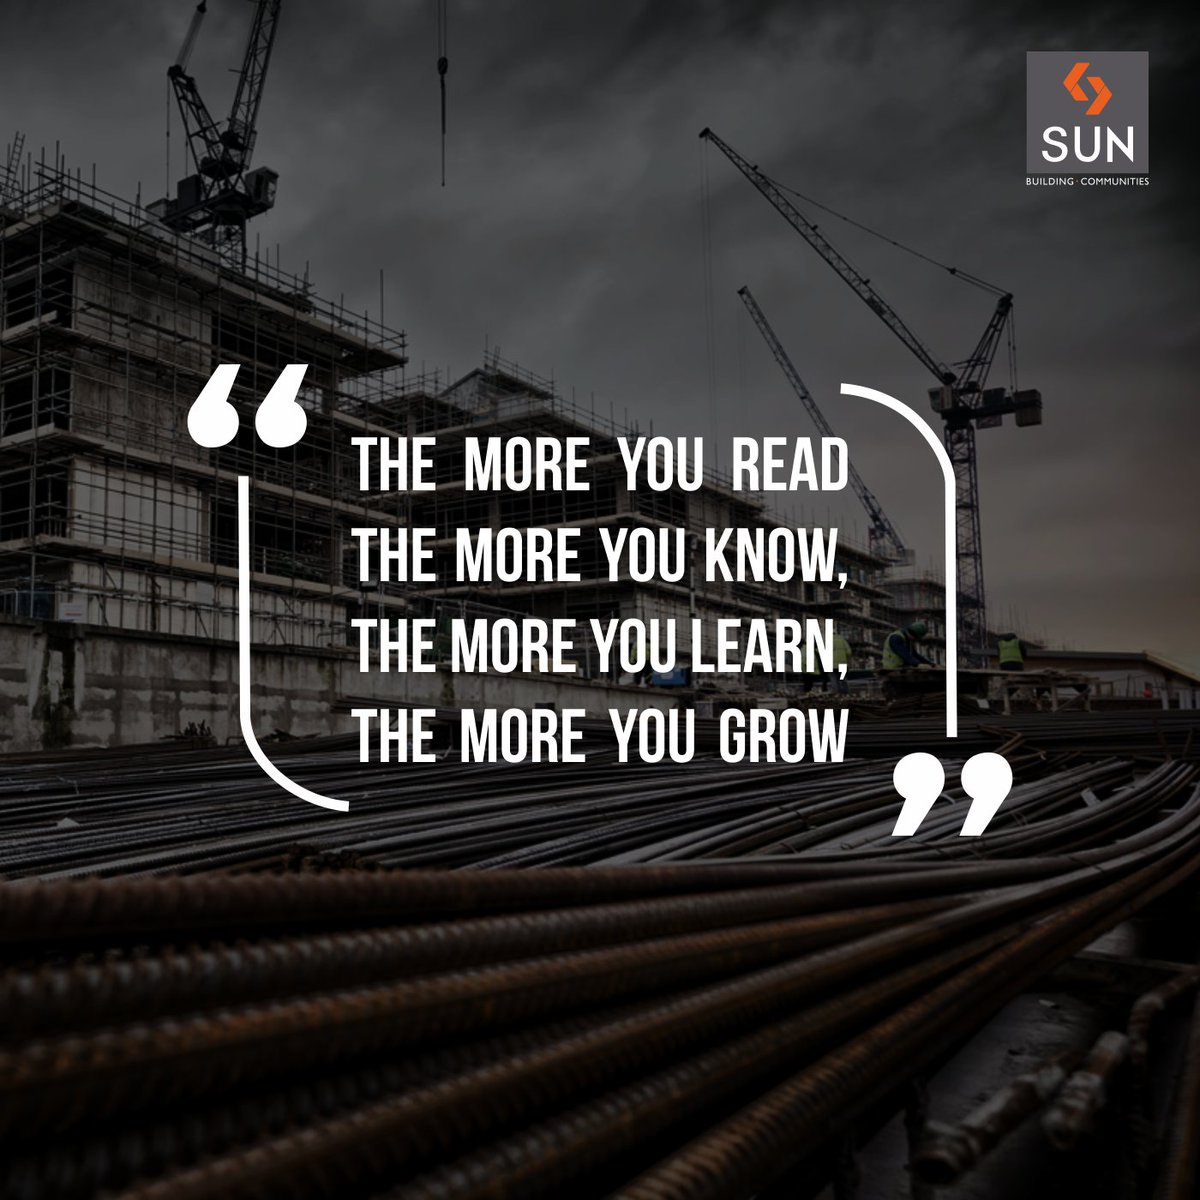 #Corporate #Quote
Make reading your passion to know more, and grow more. https://t.co/3EM2MLkt2G